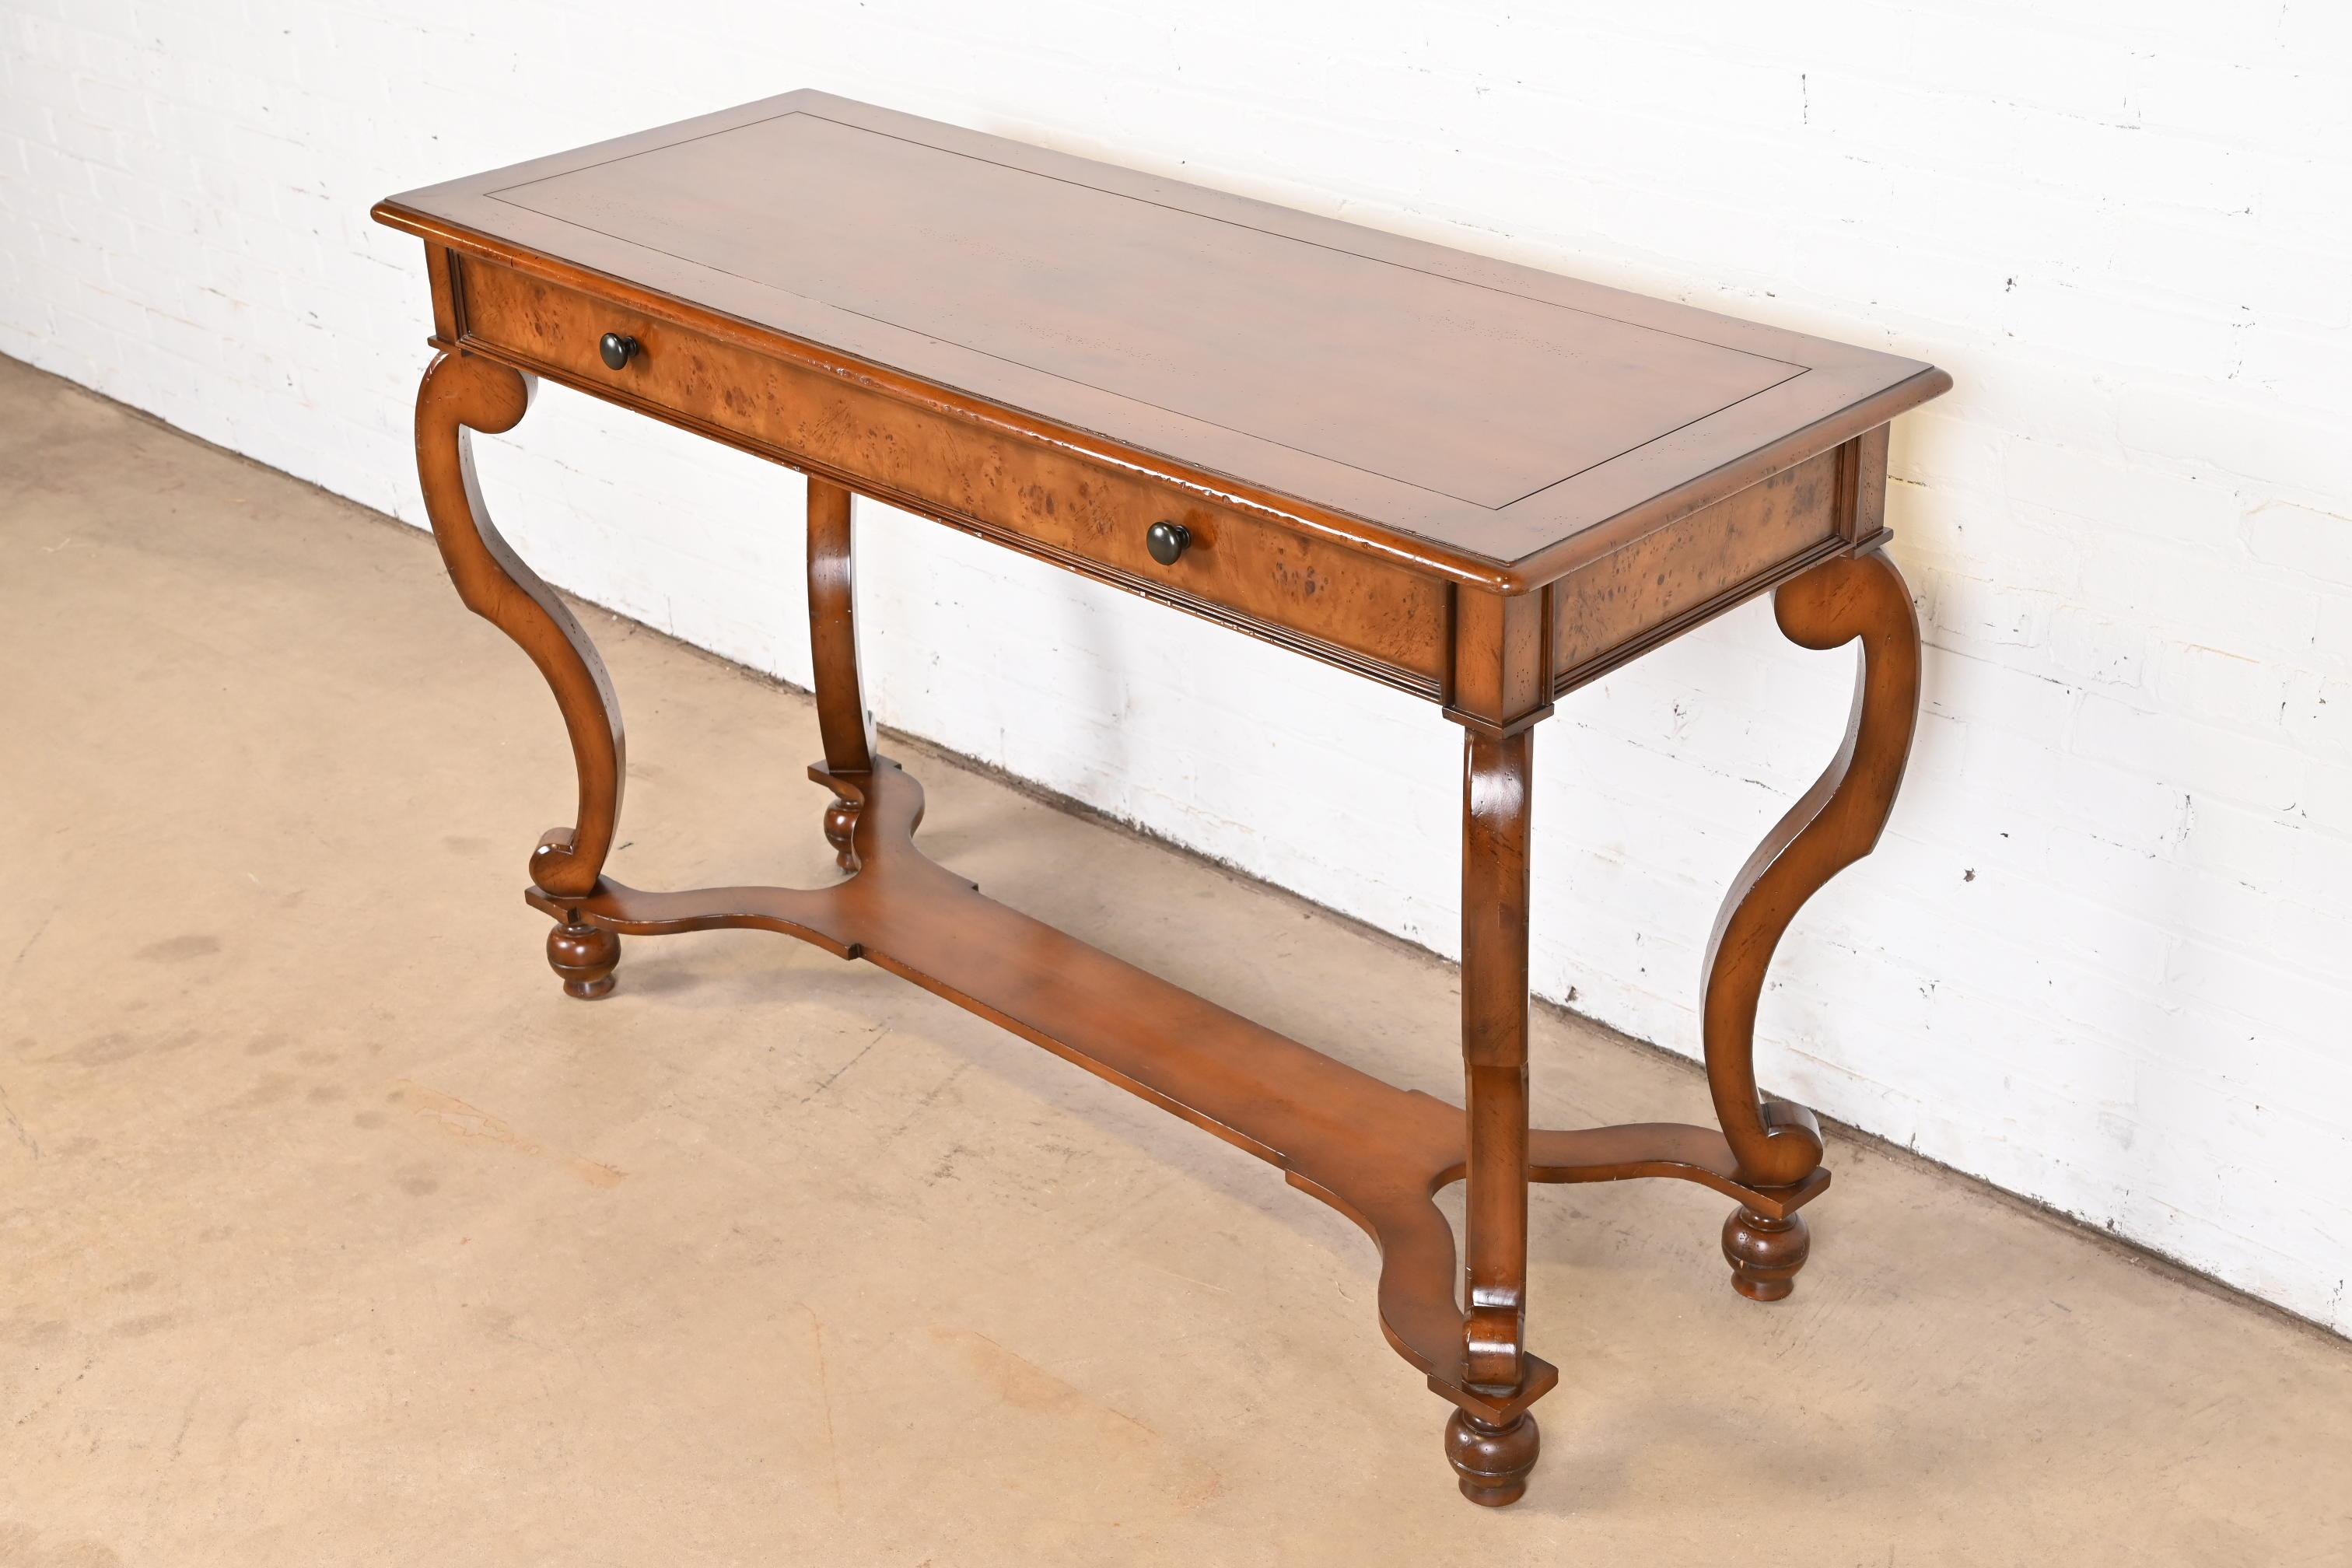 A gorgeous Italian Provincial or Rustic European style console table or sofa table

By Baker Furniture, 